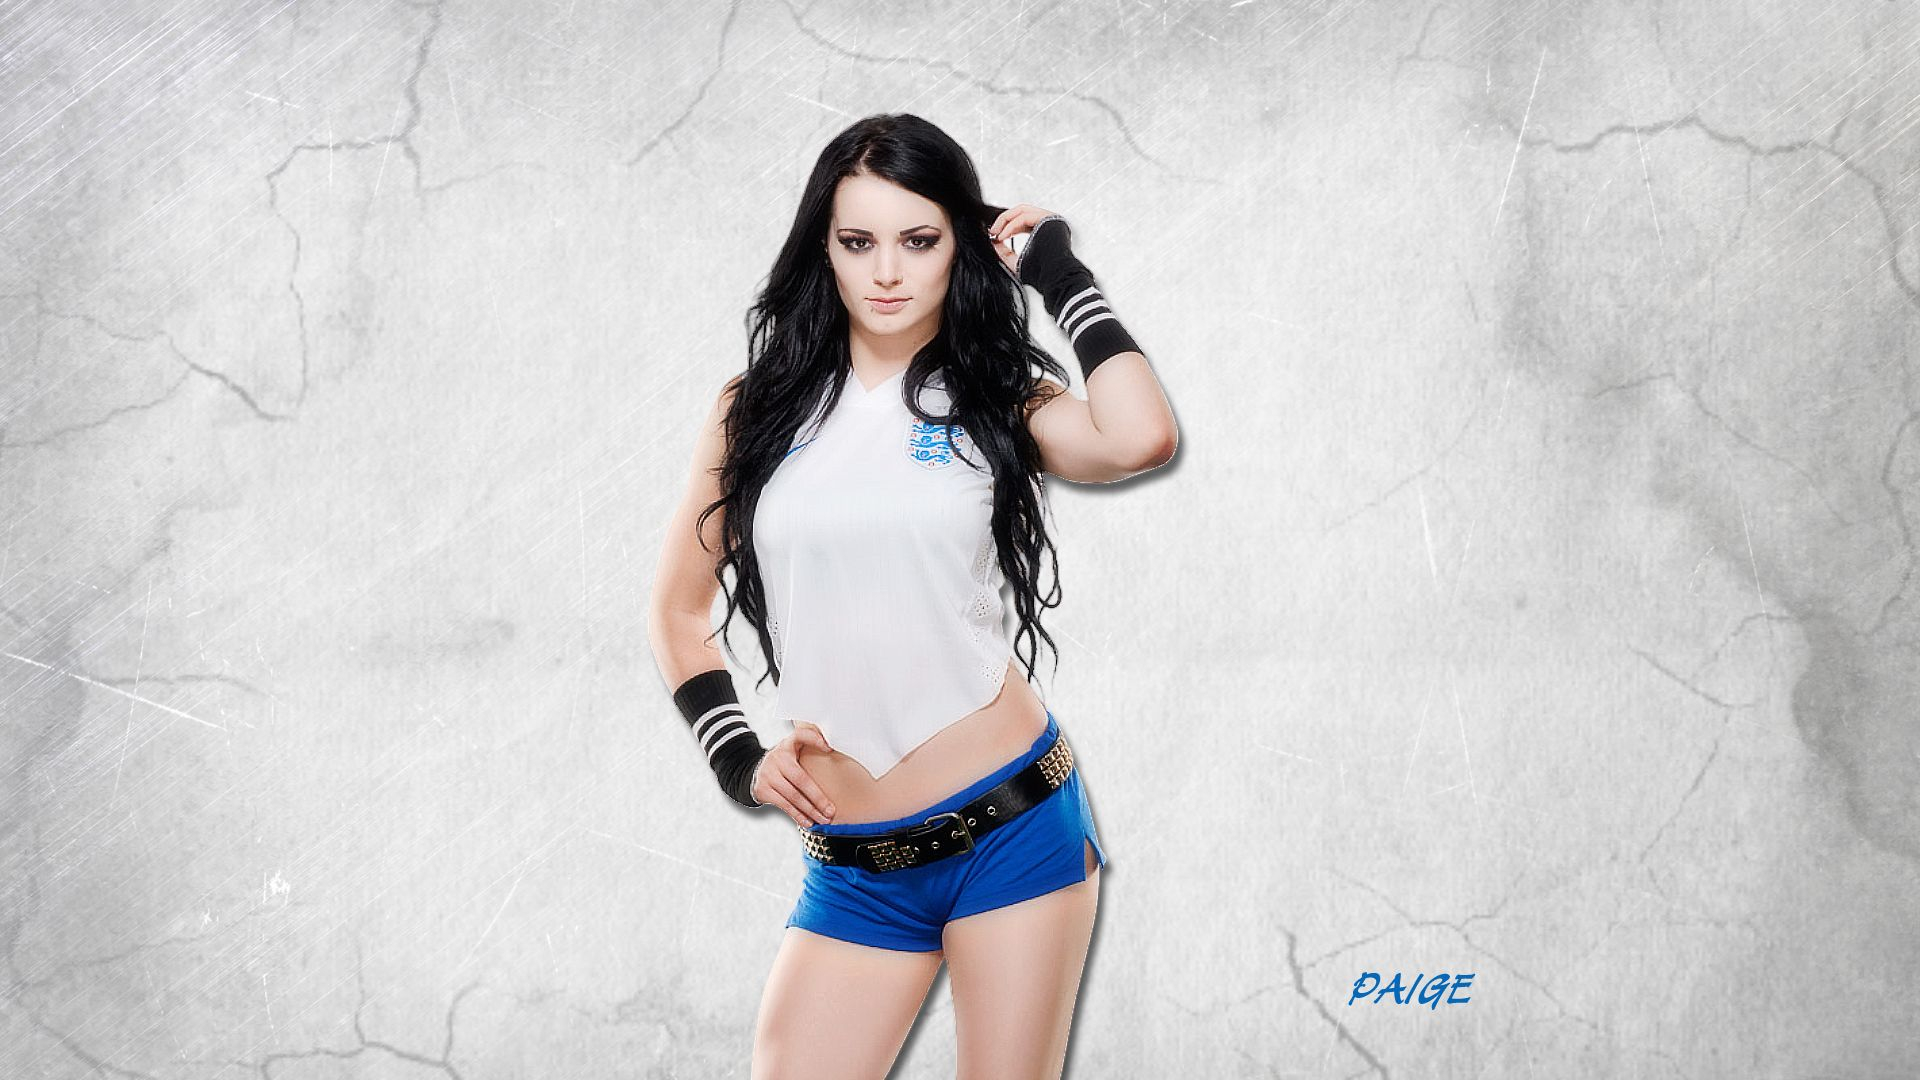 1920x1080 Paige Wallpapers Top Free Paige Backgrounds